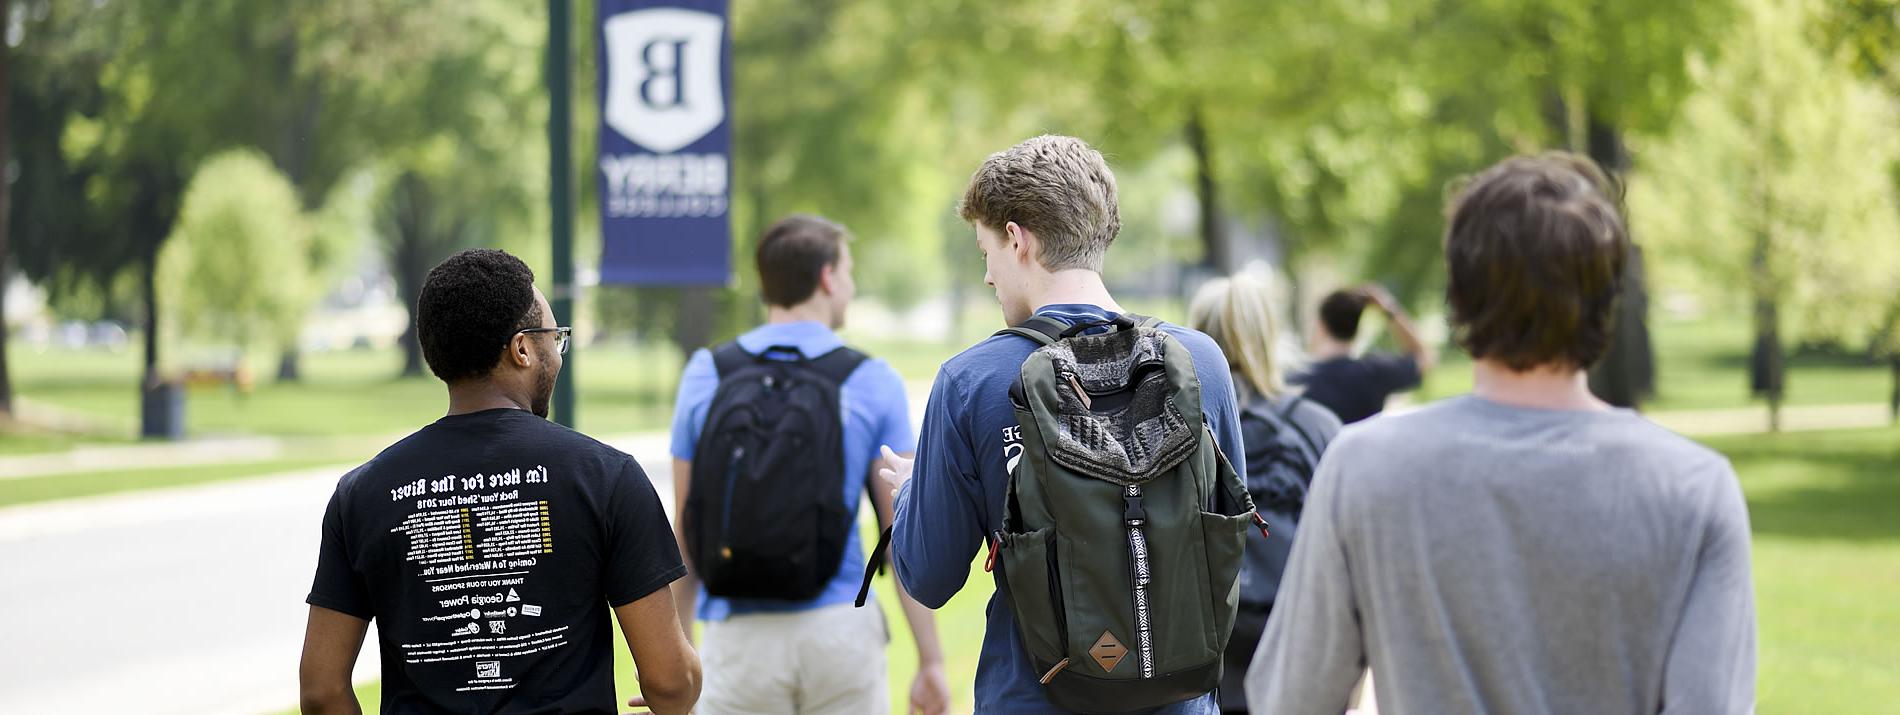 Group of students with backpacks walking on campus